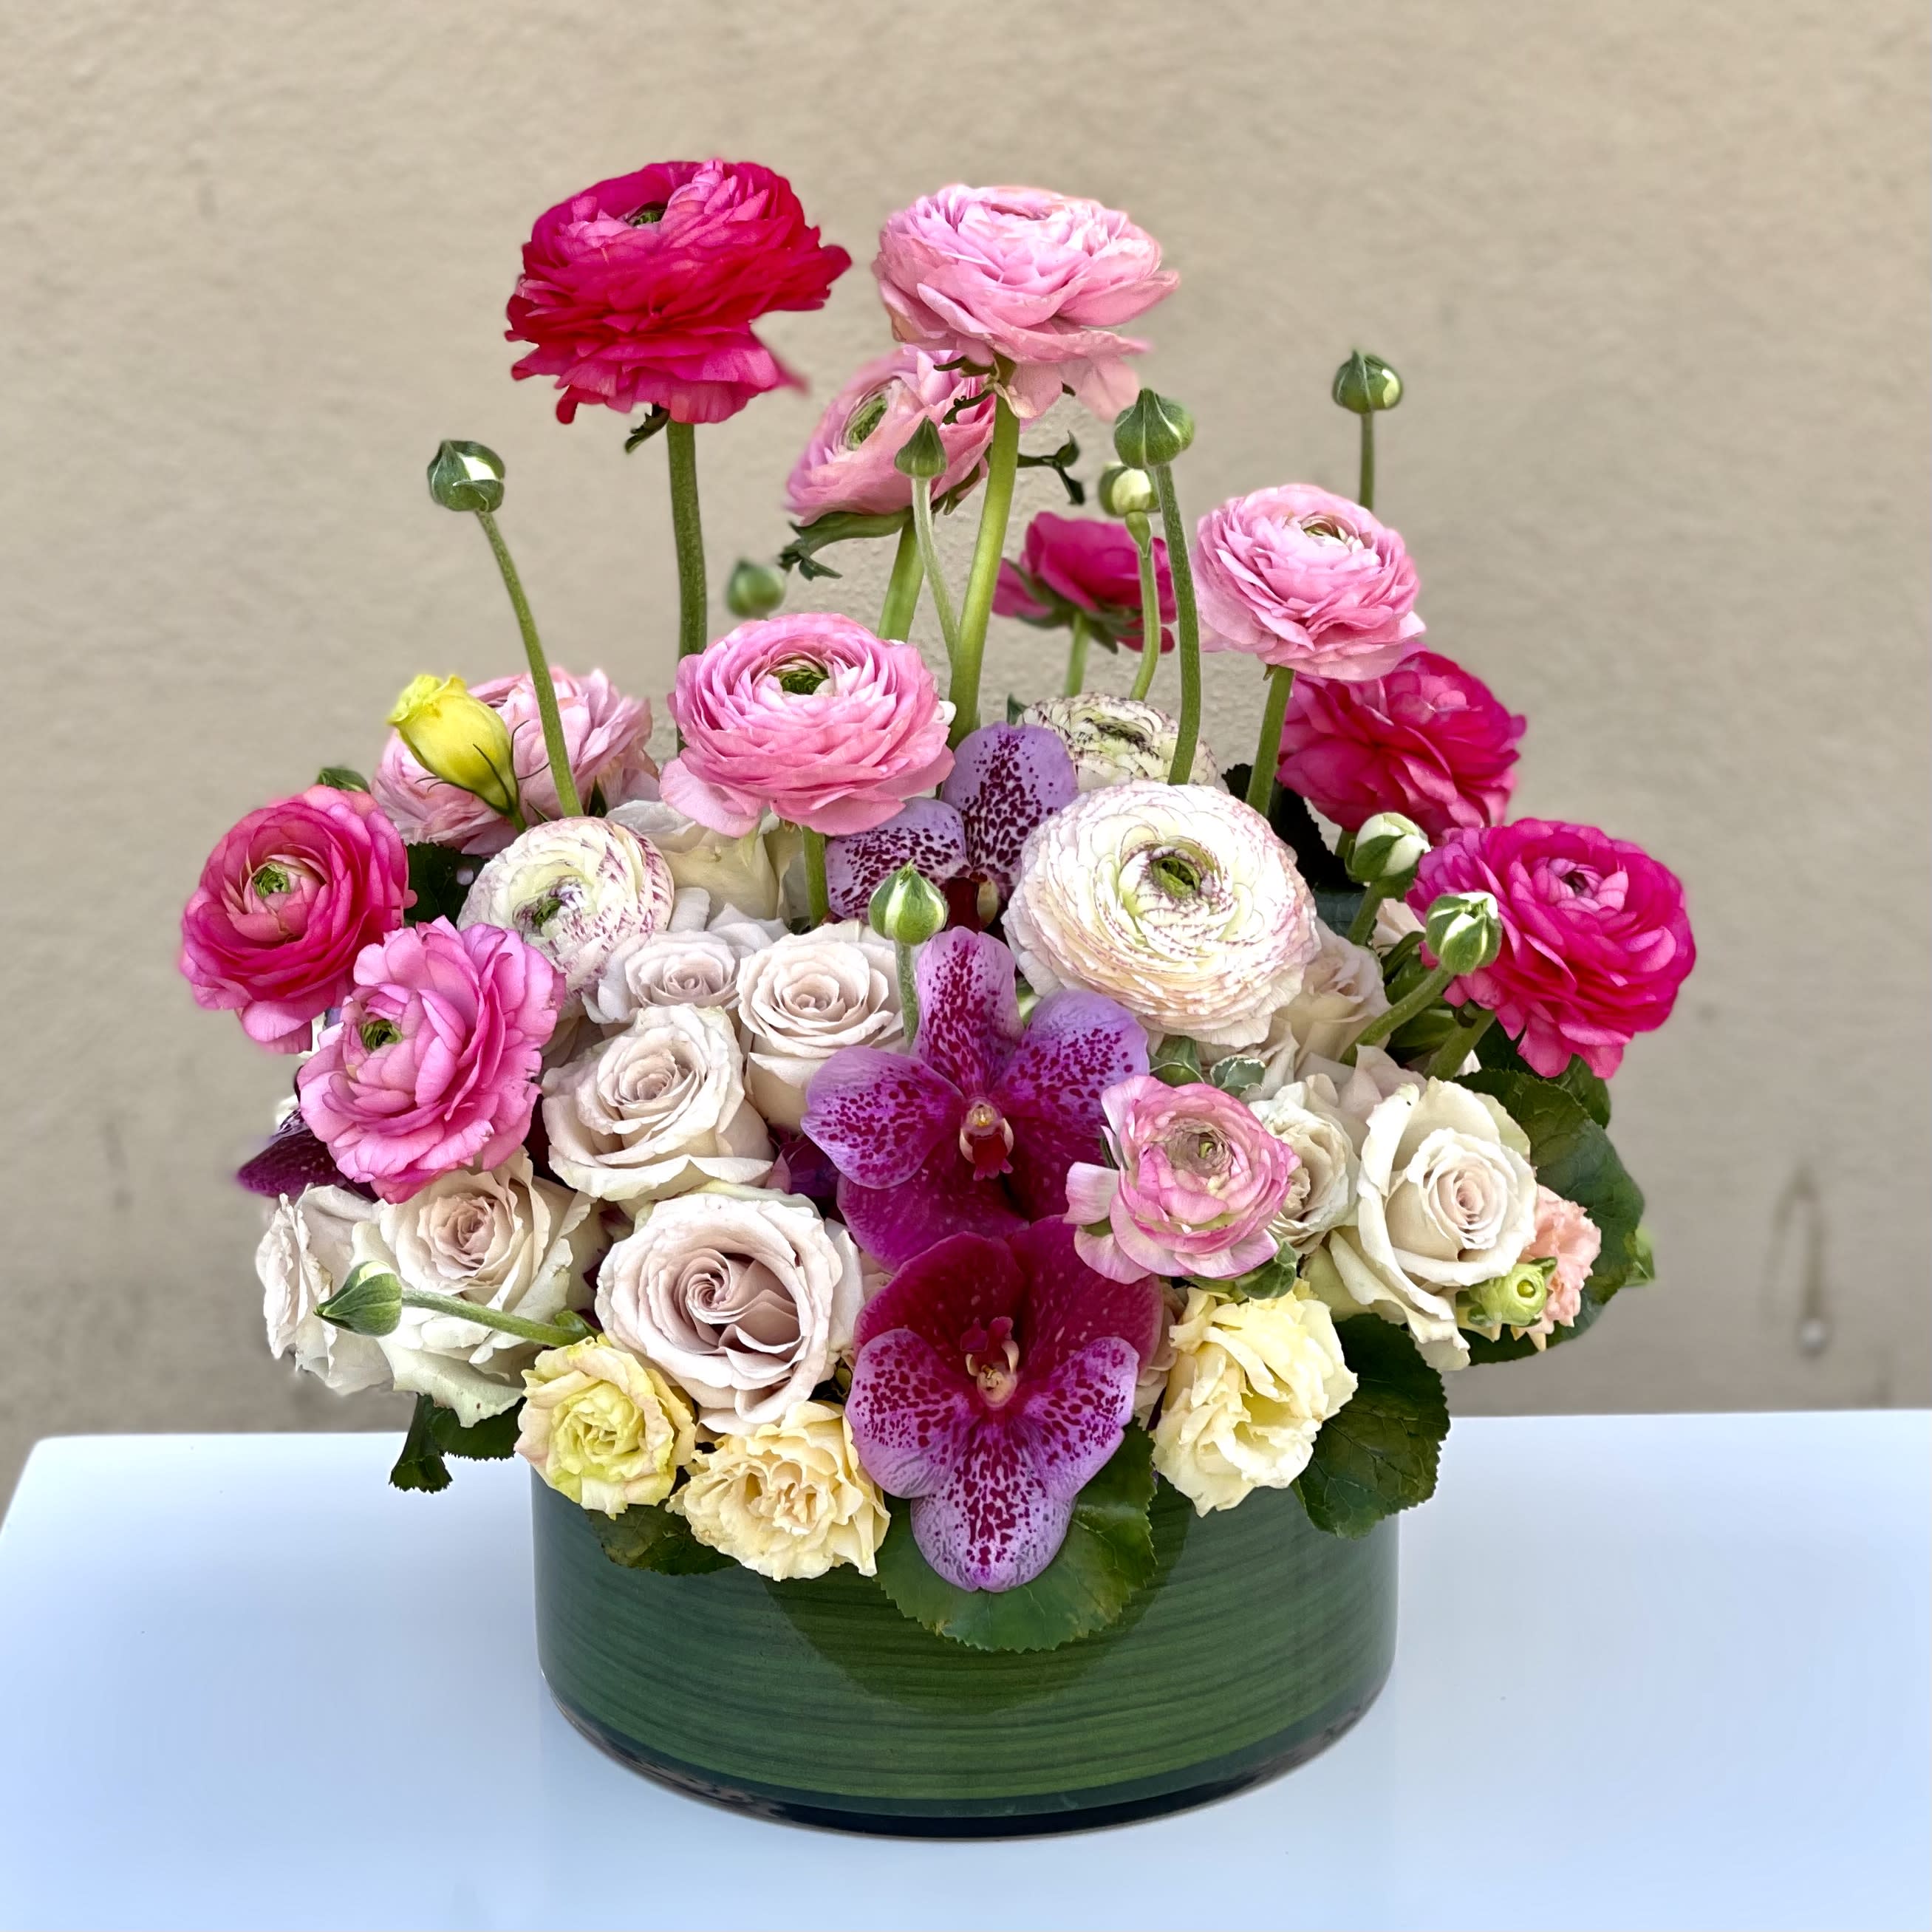 Make a wish - Fresh from the garden.... a lovely mix of over 75 stunning multi-colored blooms including Hydrangeas, Roses, and a variety of other seasonal flowers. Luscious colors, beautiful buds and textures combine into a dazzling bouquet of blossoms~ sure to warm the heart. 